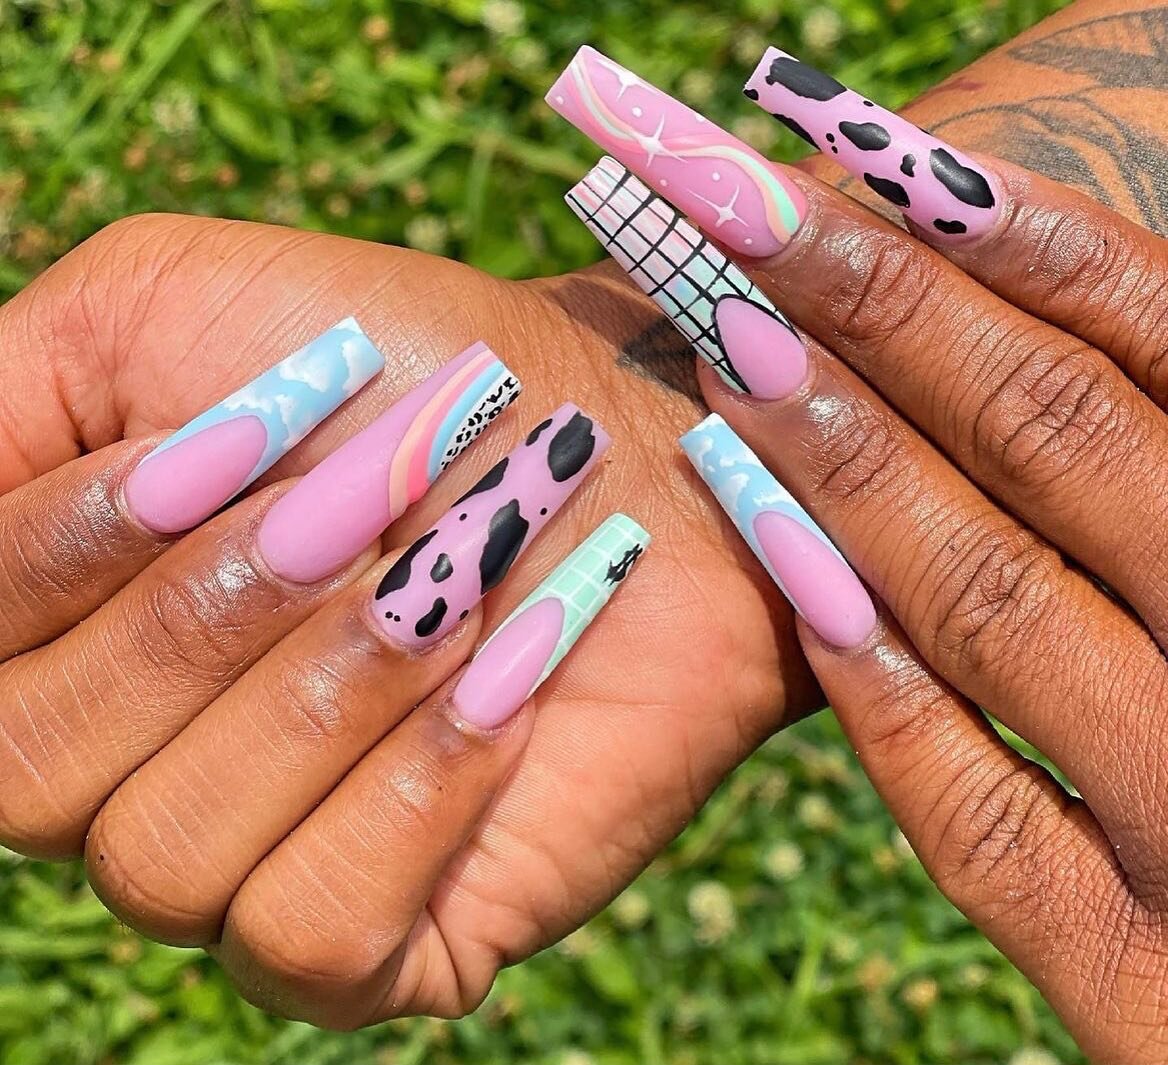 Whimsical. 🦋
-
Nails by Chazz Garner